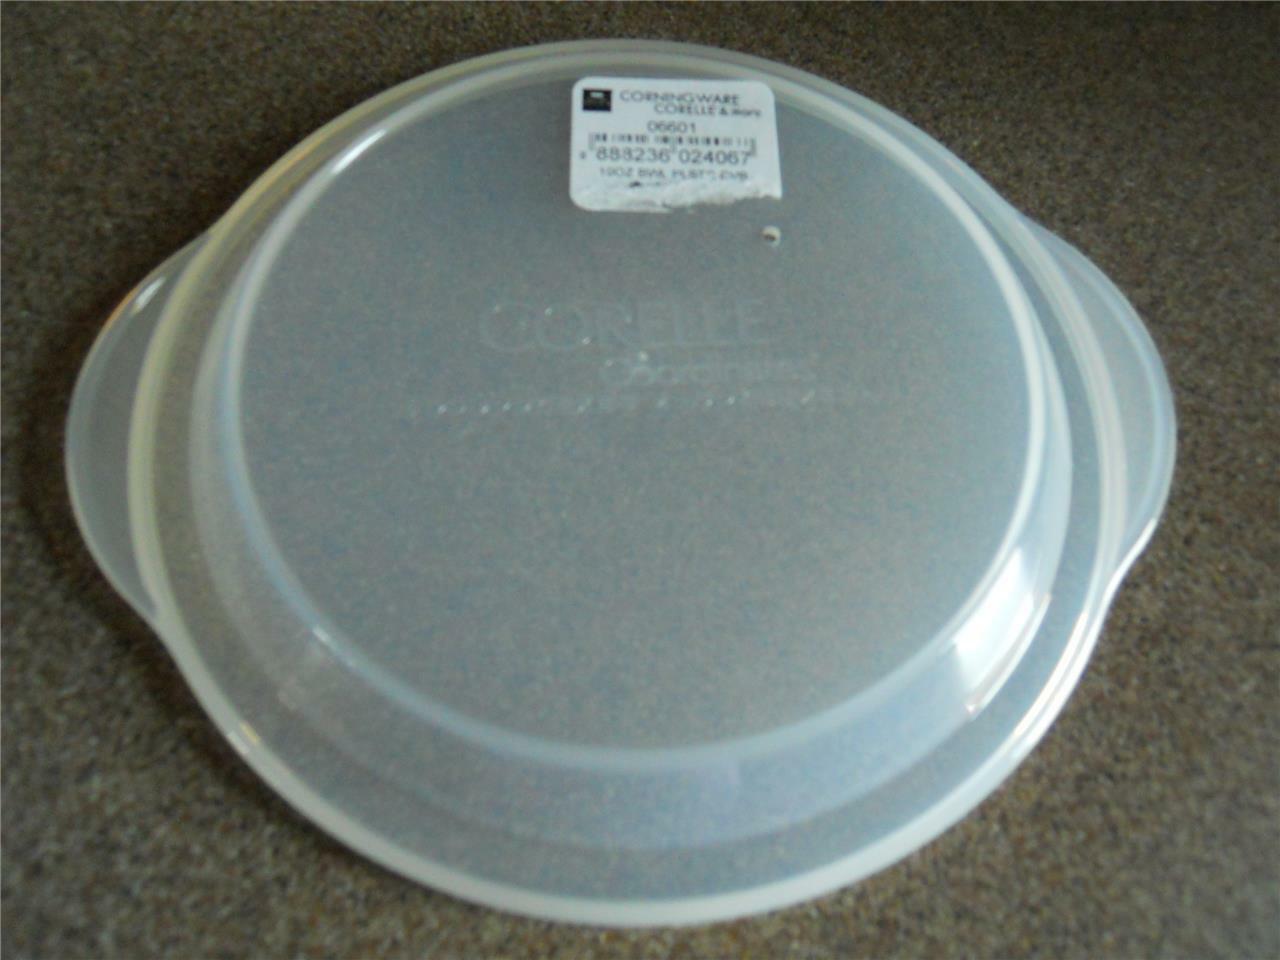 1 Corelle SHEER MICROWAVE Plastic COVER w/Vent Hole for 10-oz Bowl